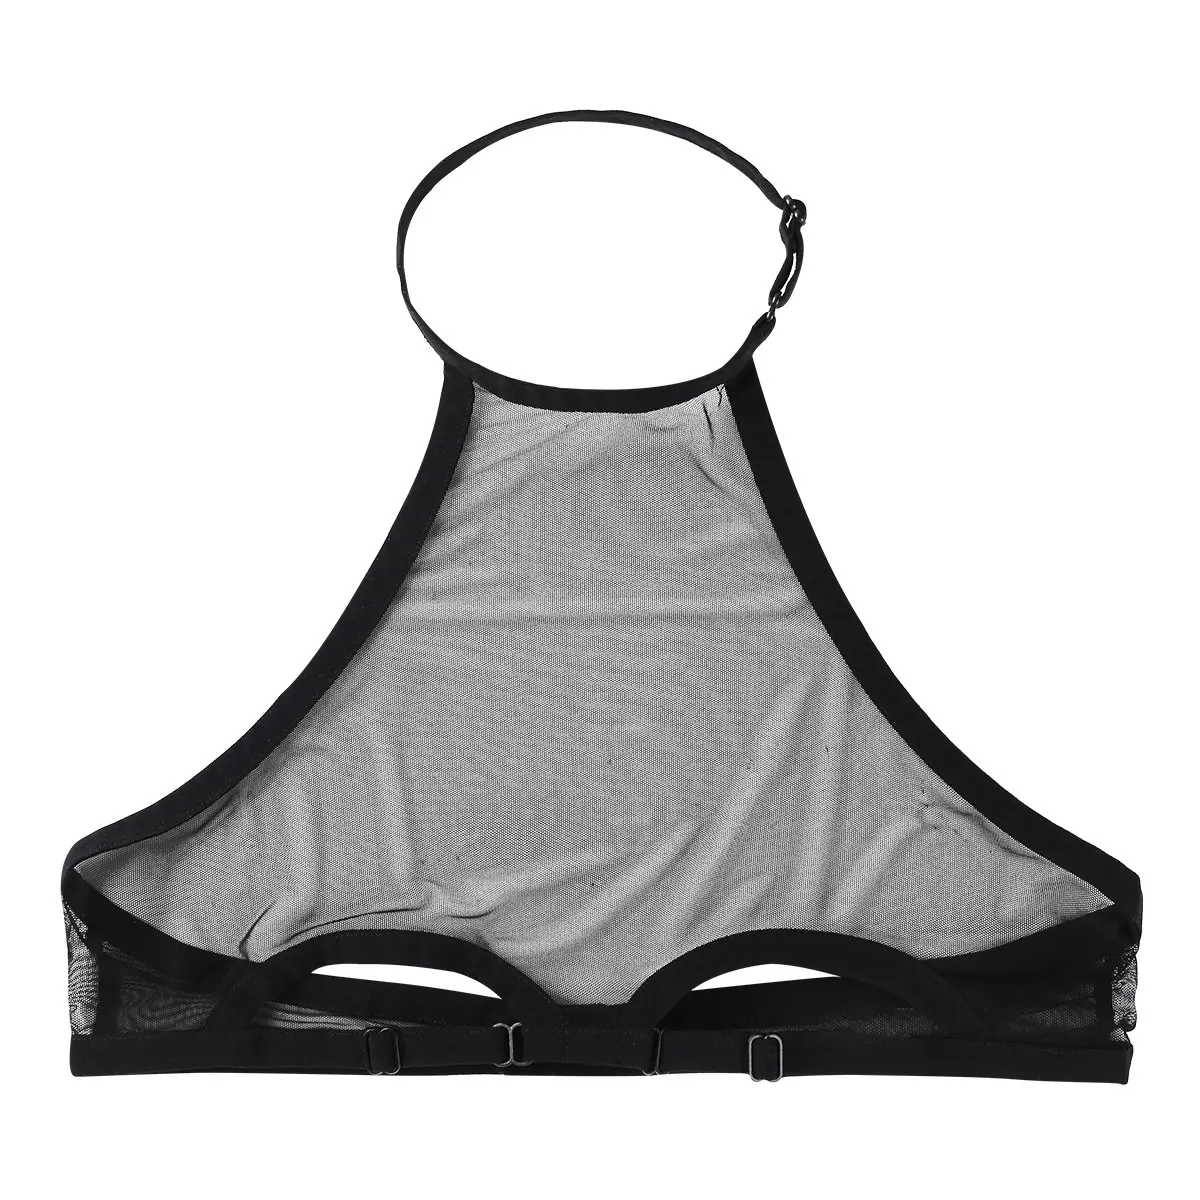 Women's See Through Lingerie Bra Top Mesh Sheer Bra Top Lingerie Halter Neck Backless Hollow Out Cups Wire-free Unlined Bra Top